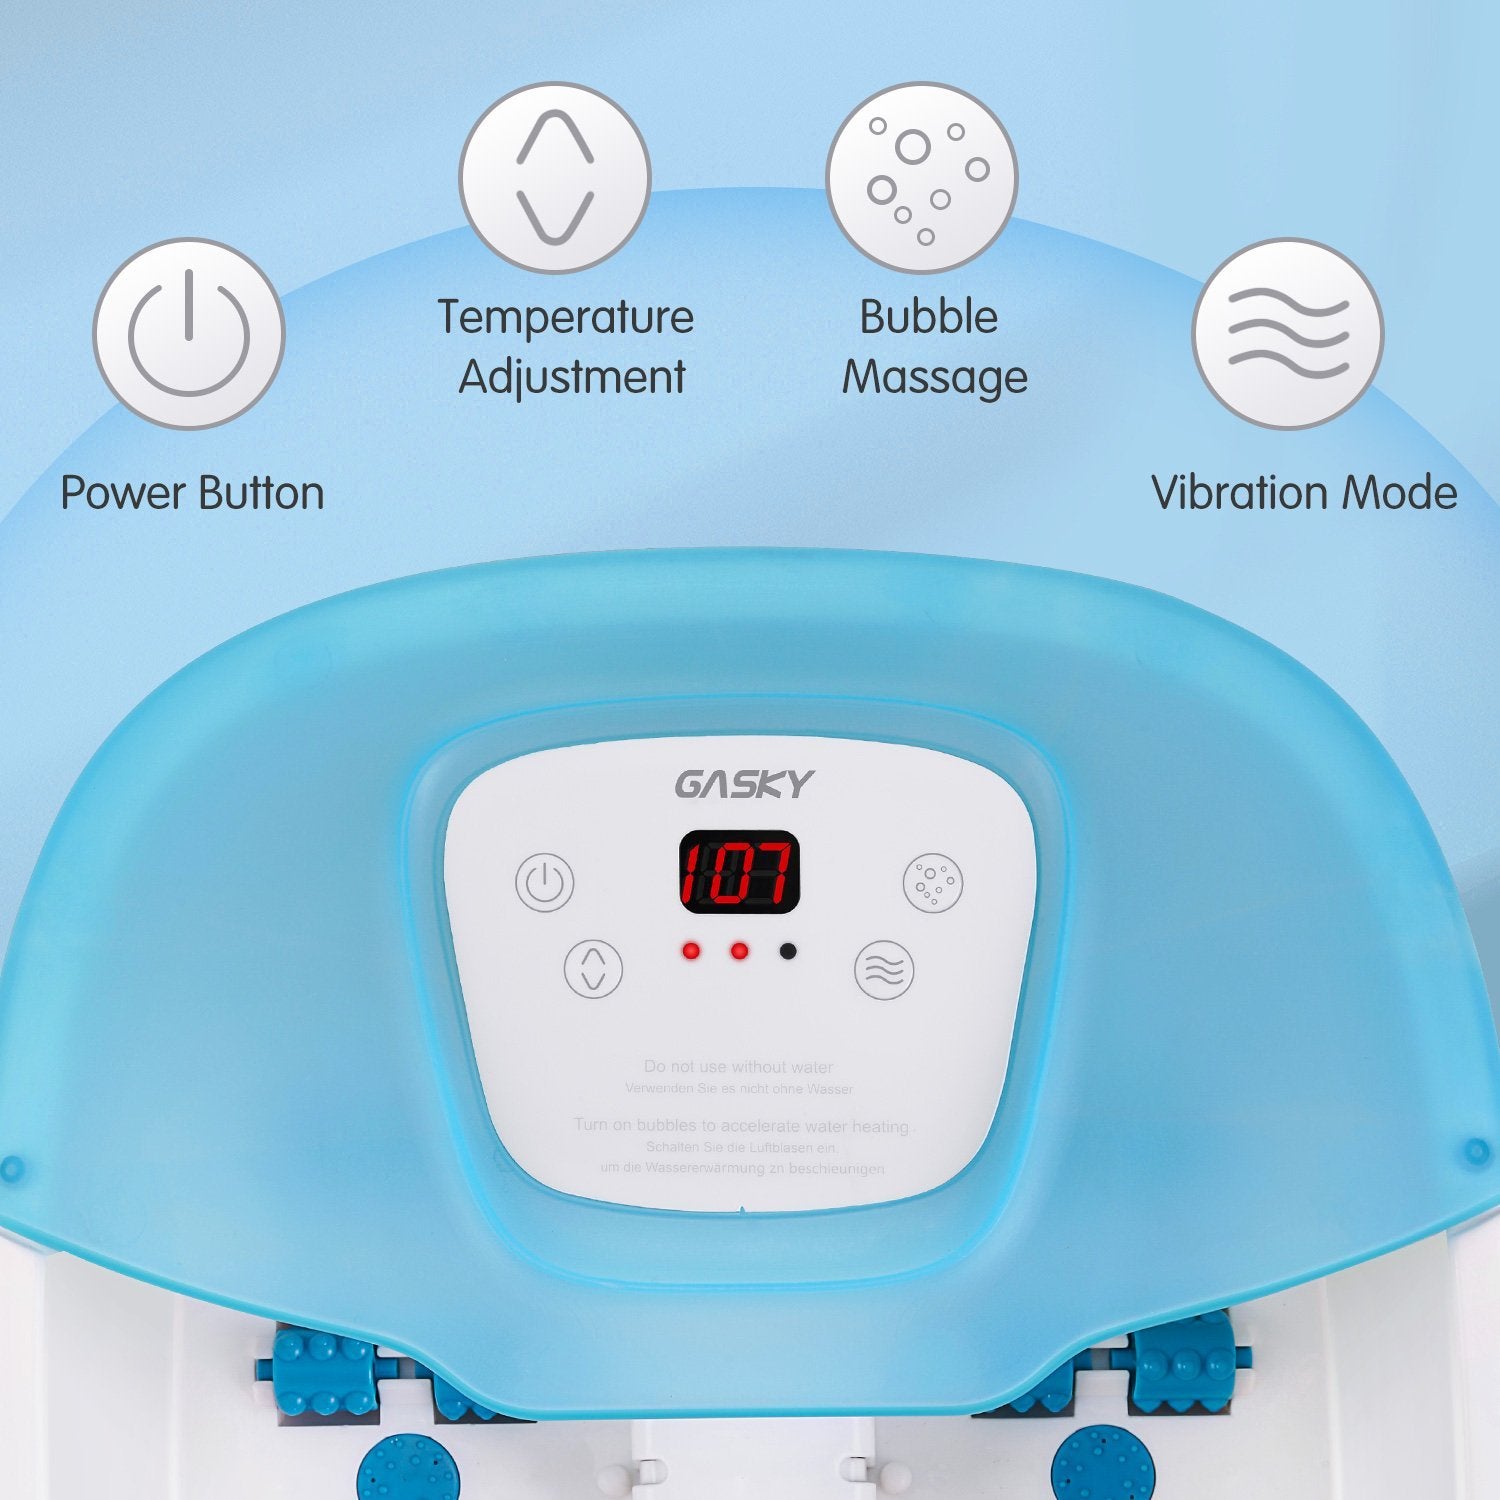 Load image into Gallery viewer, Foot Bath Massager with Heat, Vibration, Bubbles and Pedicure Grinding Stone, Heated Foot Spa of 16 Shiatsu Masssage Rollers, Adjustable Temperature Foot Soaking Bath Basin for Home Use - NAIPO
